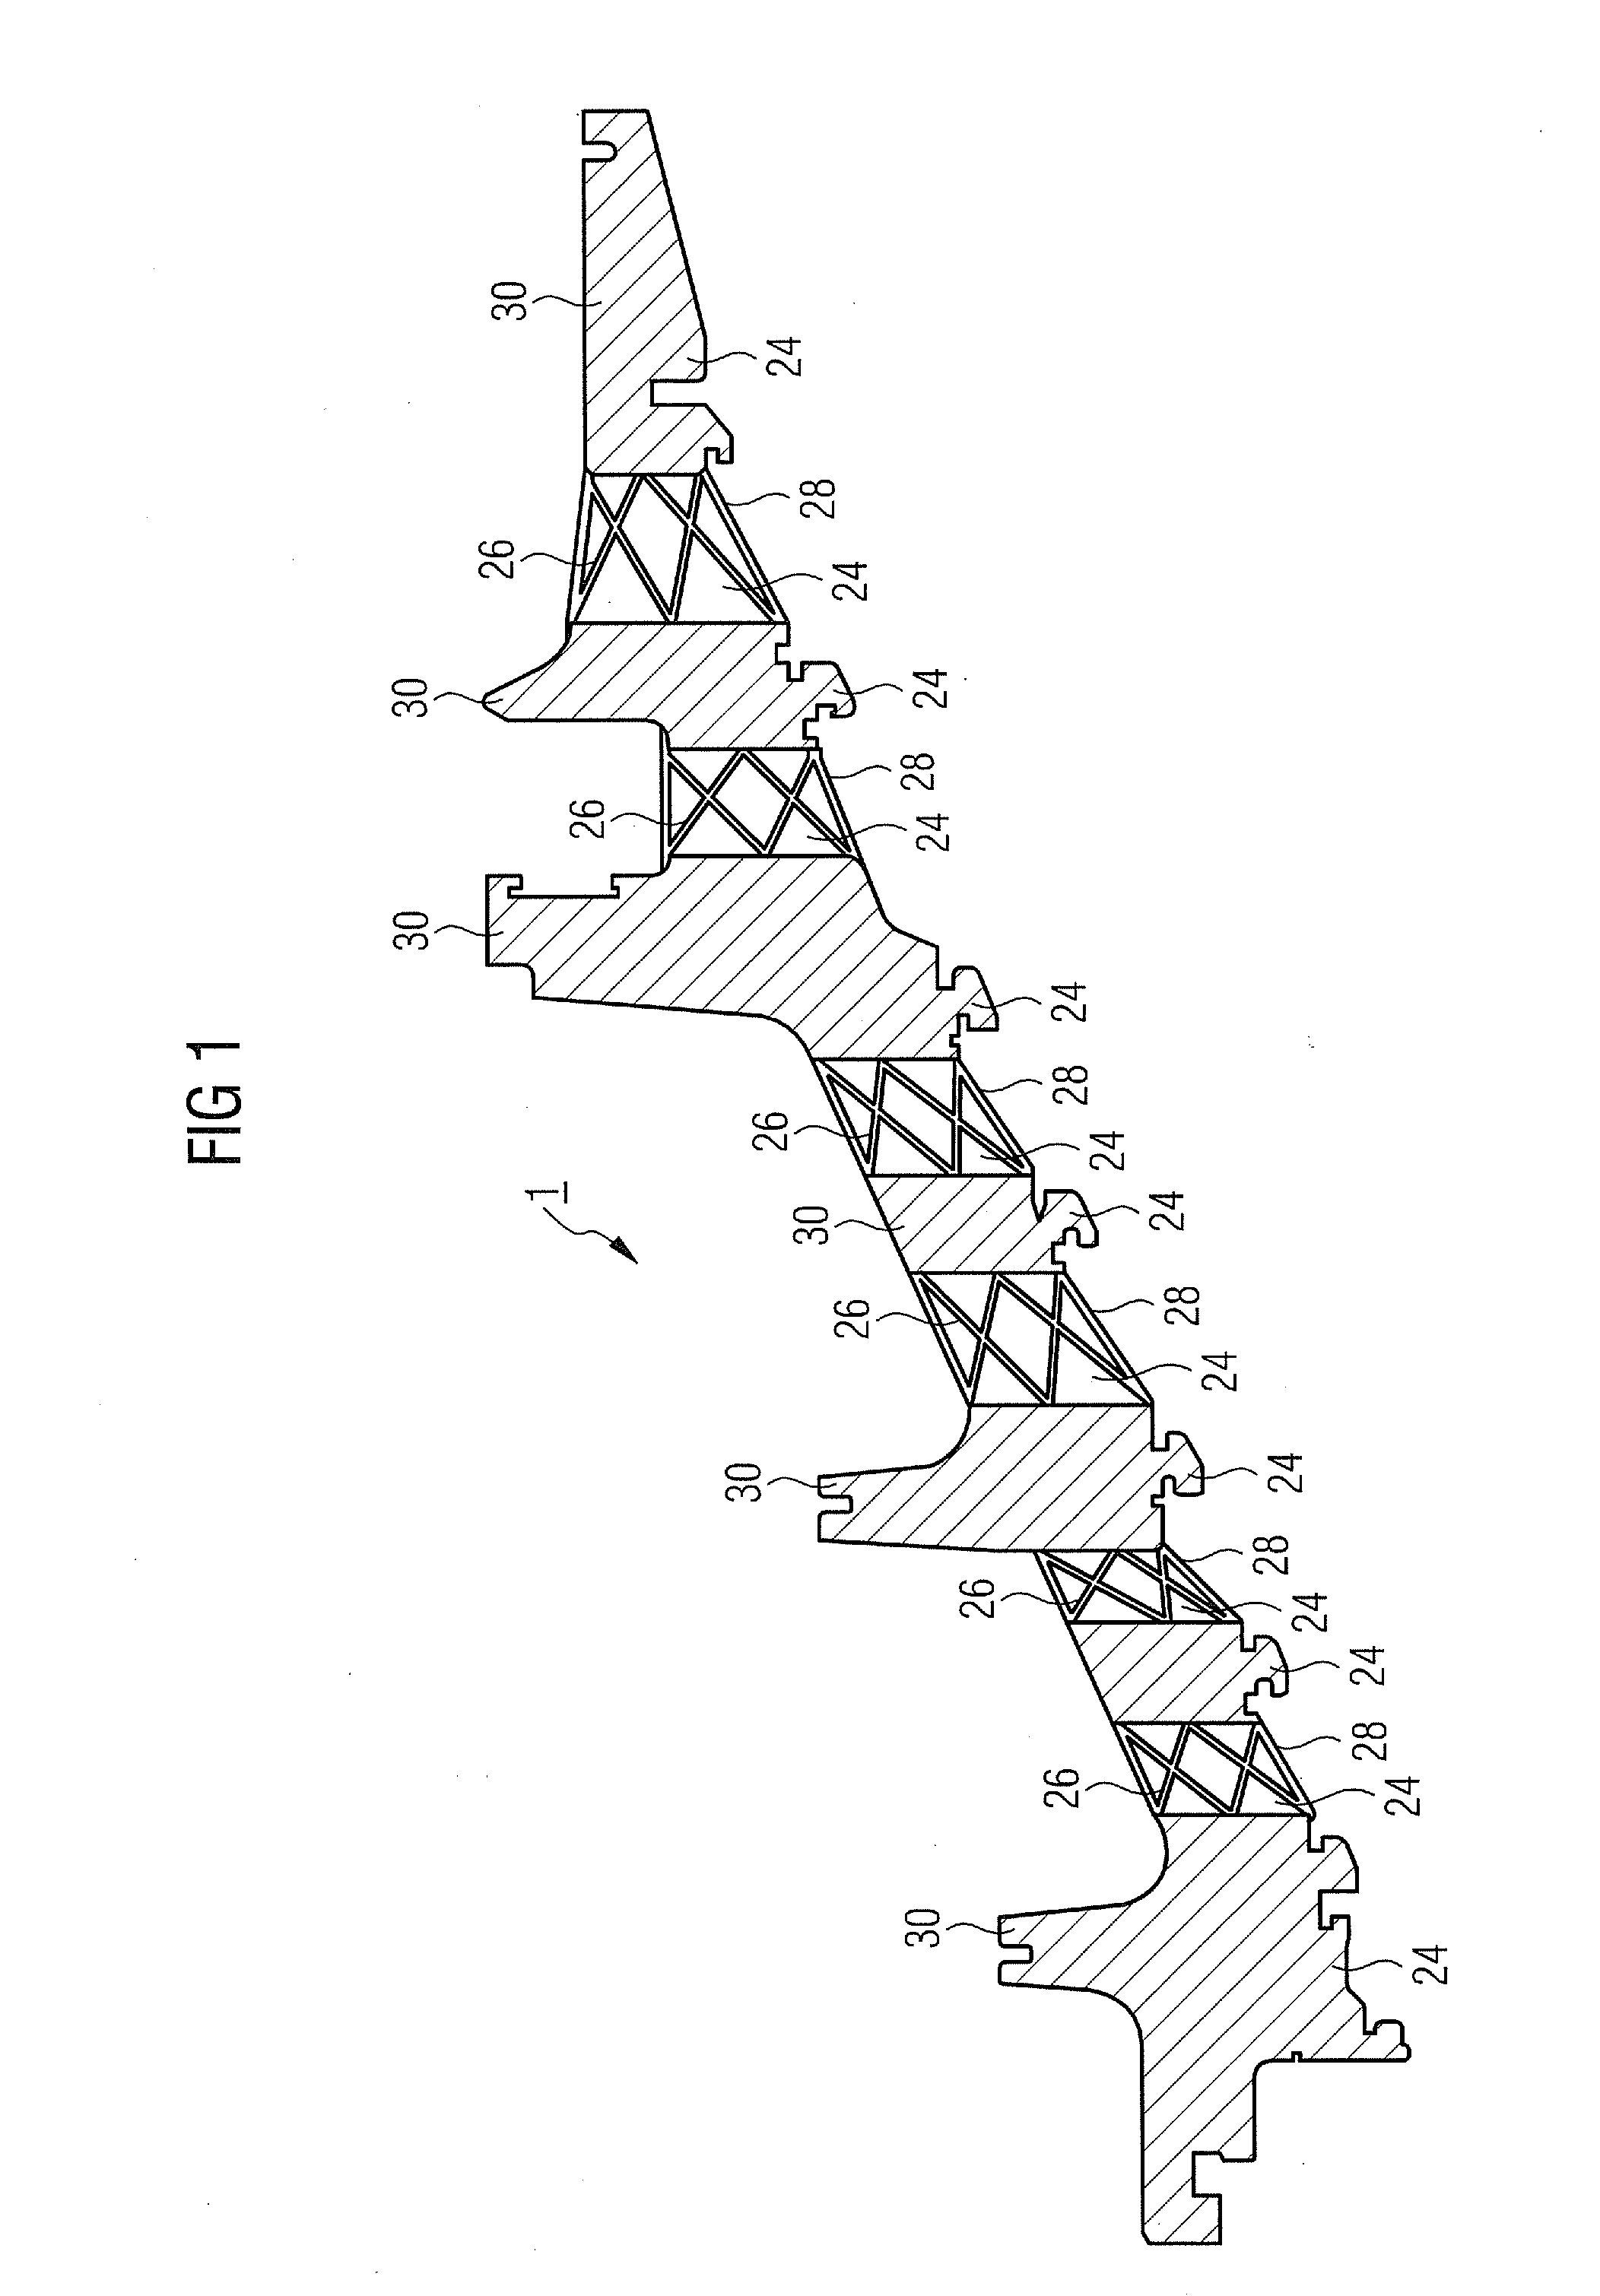 Axially segmented guide vane mount for a gas turbine